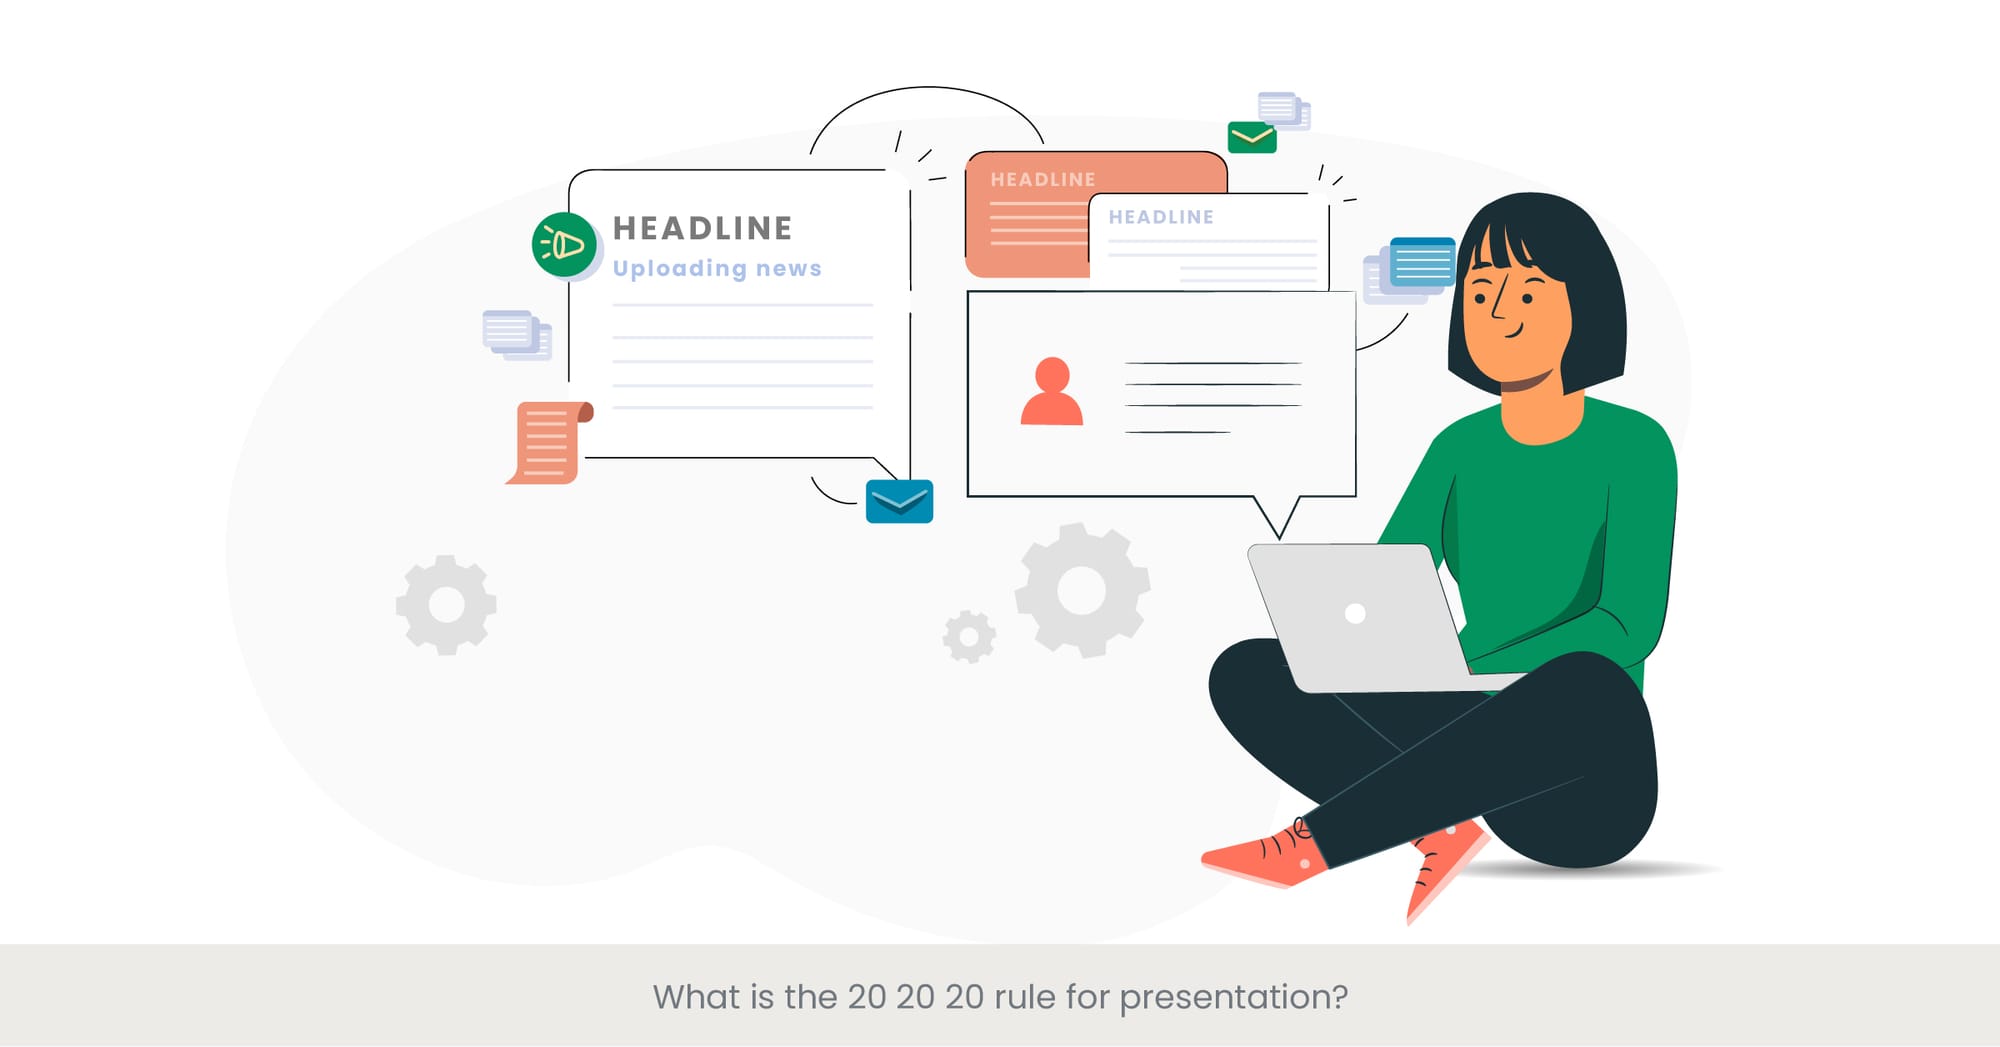 What is the 20 20 20 rule for presentation